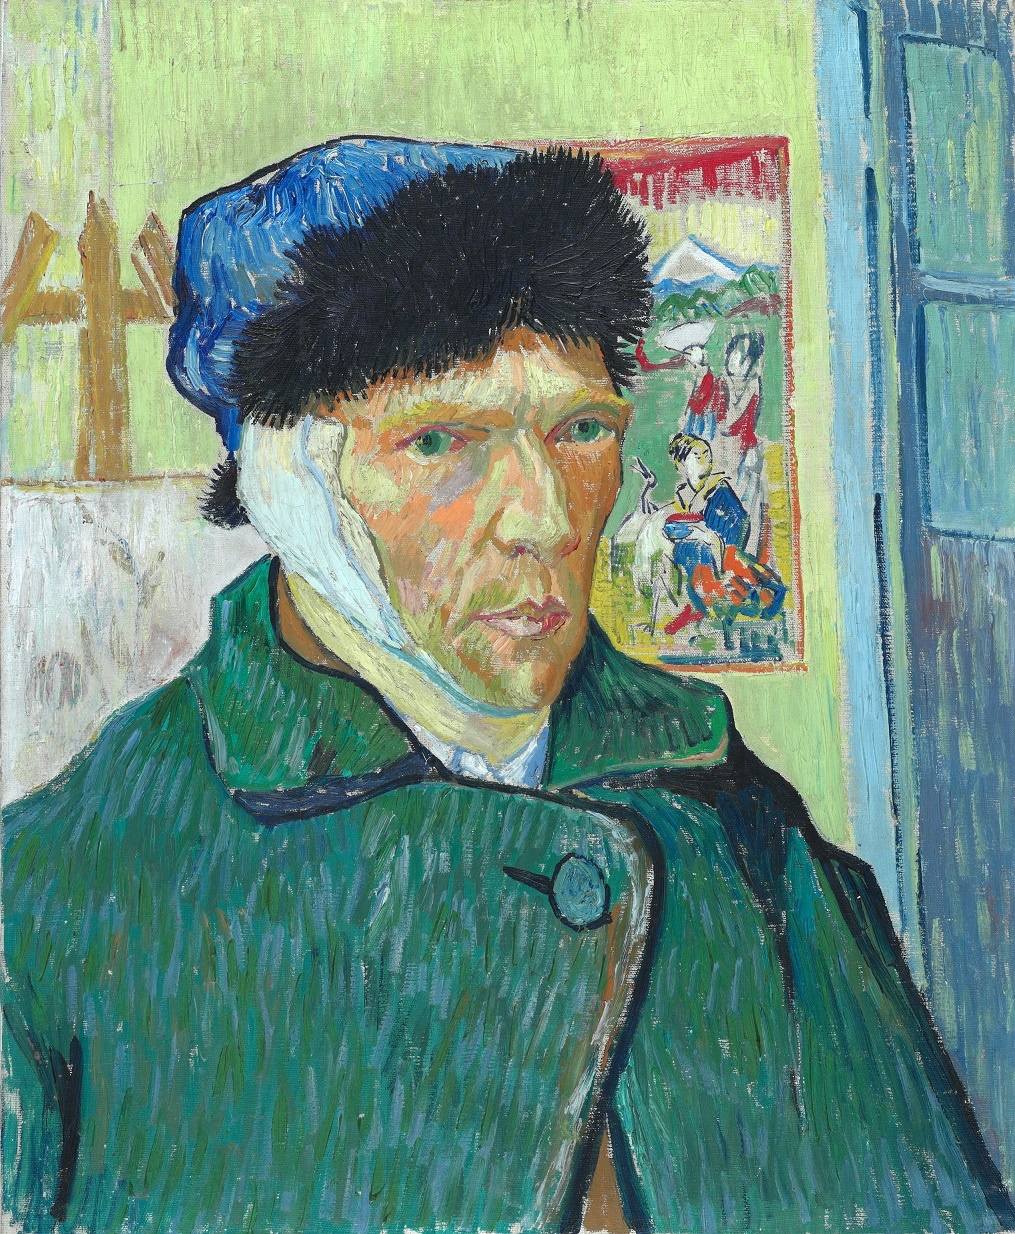 Self-portrait with bandaged ear, 1889 painting by Vincent van Gogh (1853-1890) obtained on June 30, 2021. Courtesy of The Courtauld/Handout via REUTERS THIS IMAGE HAS BEEN SUPPLIED BY A THIRD PARTY. NO NEW USES AFTER JULY 30, 2021.